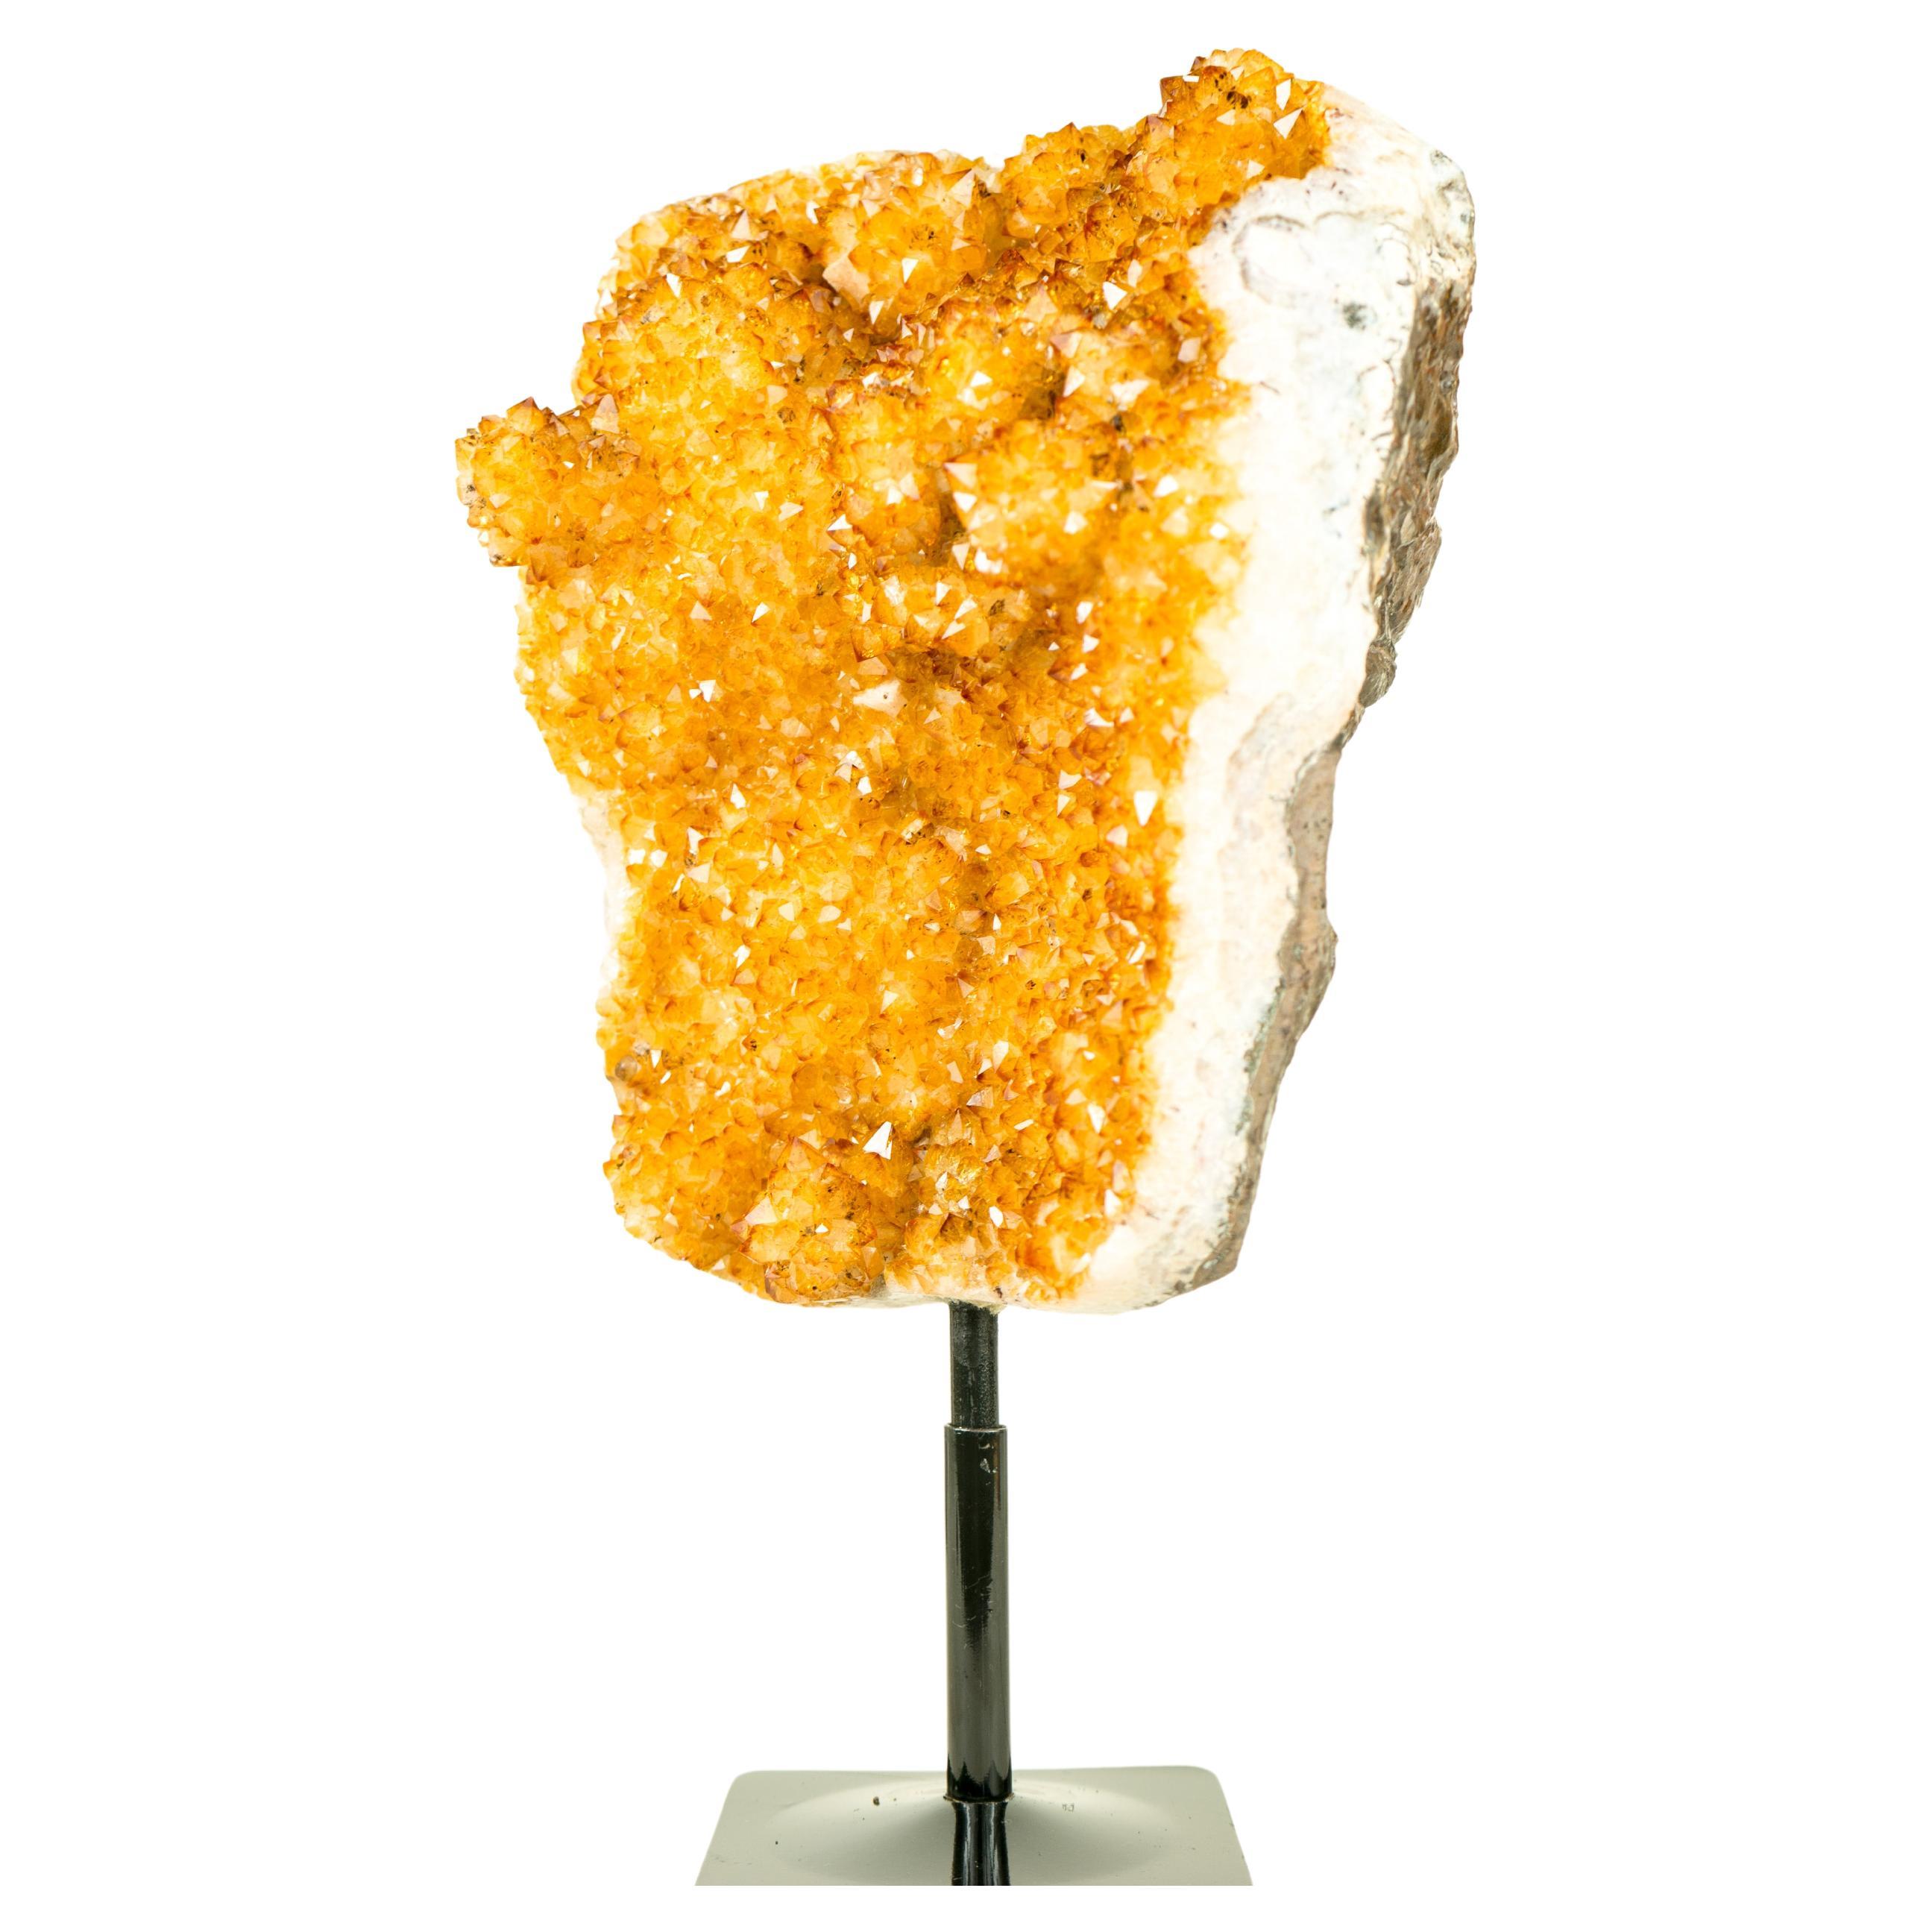 Golden Yellow Galaxy Citrine Cluster with Flower Rosettes - 5.7 Kg - 12.5 lb

▫️ Description ▫️

With its gorgeous characteristics, this Citrine Cluster features the highly sought-after Galaxy Citrine Druzy and a wonderful formation of Citrine